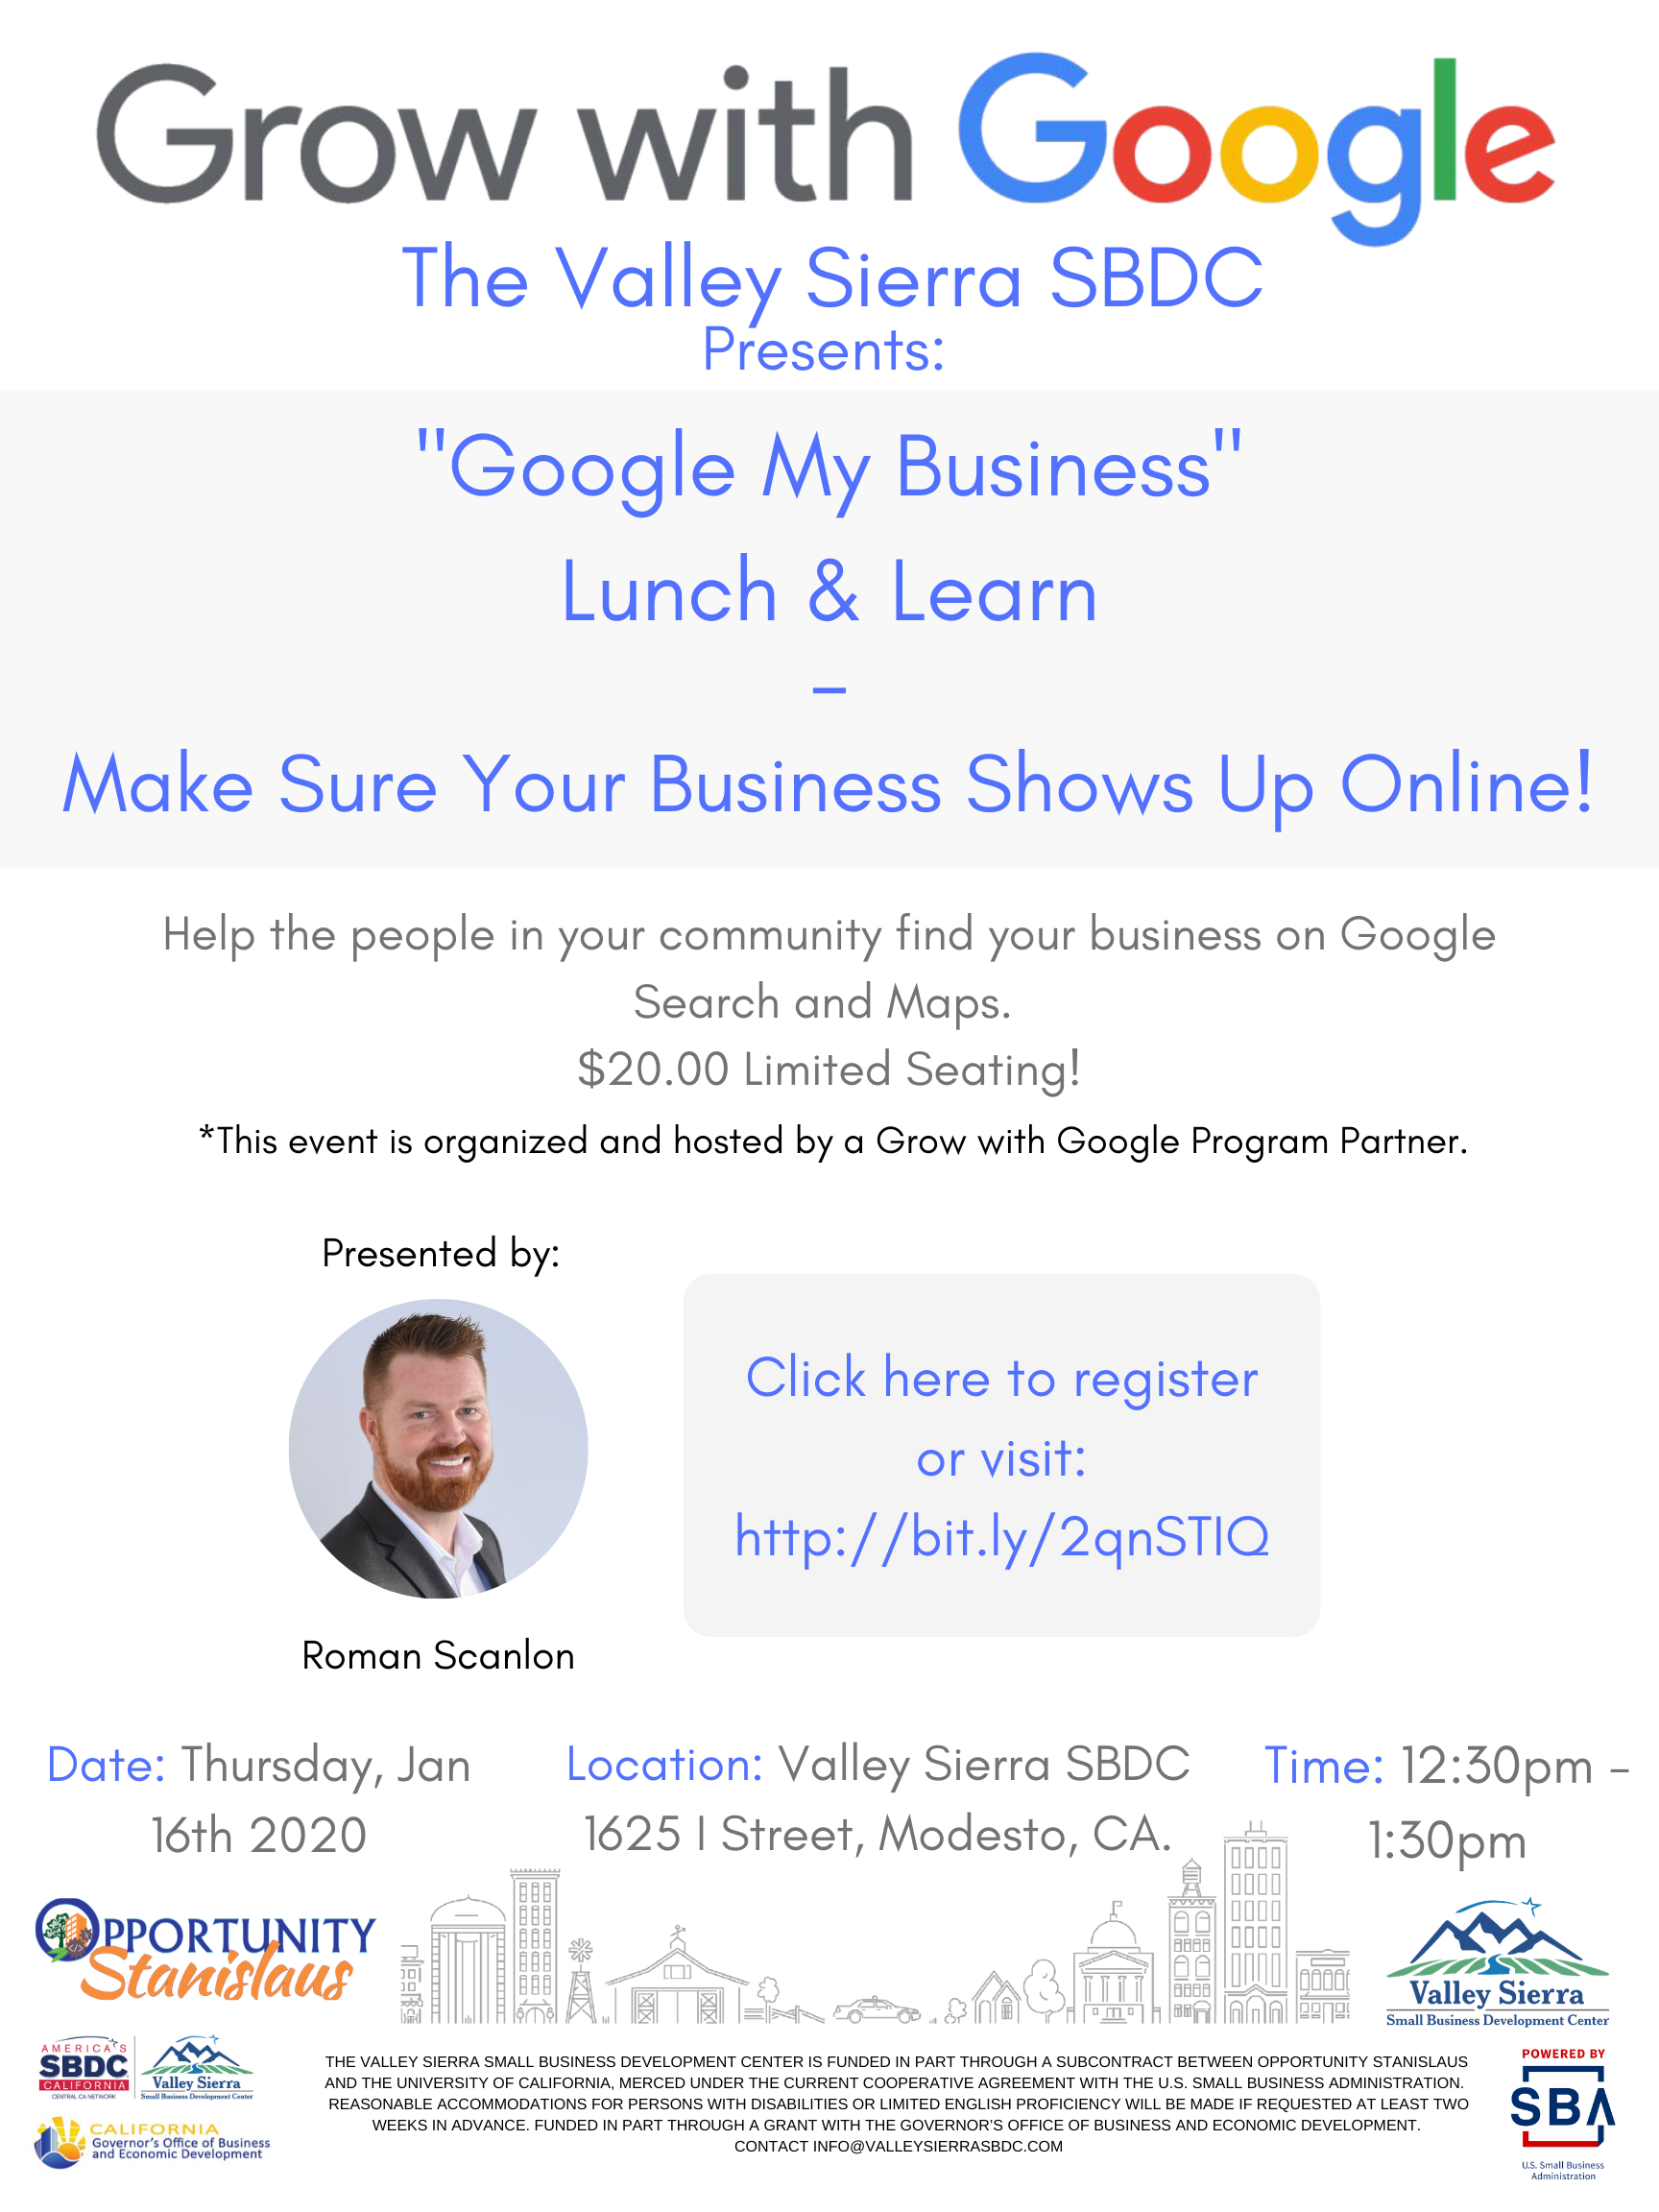 Event Flyer, Google My Business, $20.00 Lunch & Learn Thursday, January 16th 2020 from 12:30pm - 1:30pm. Register Today!